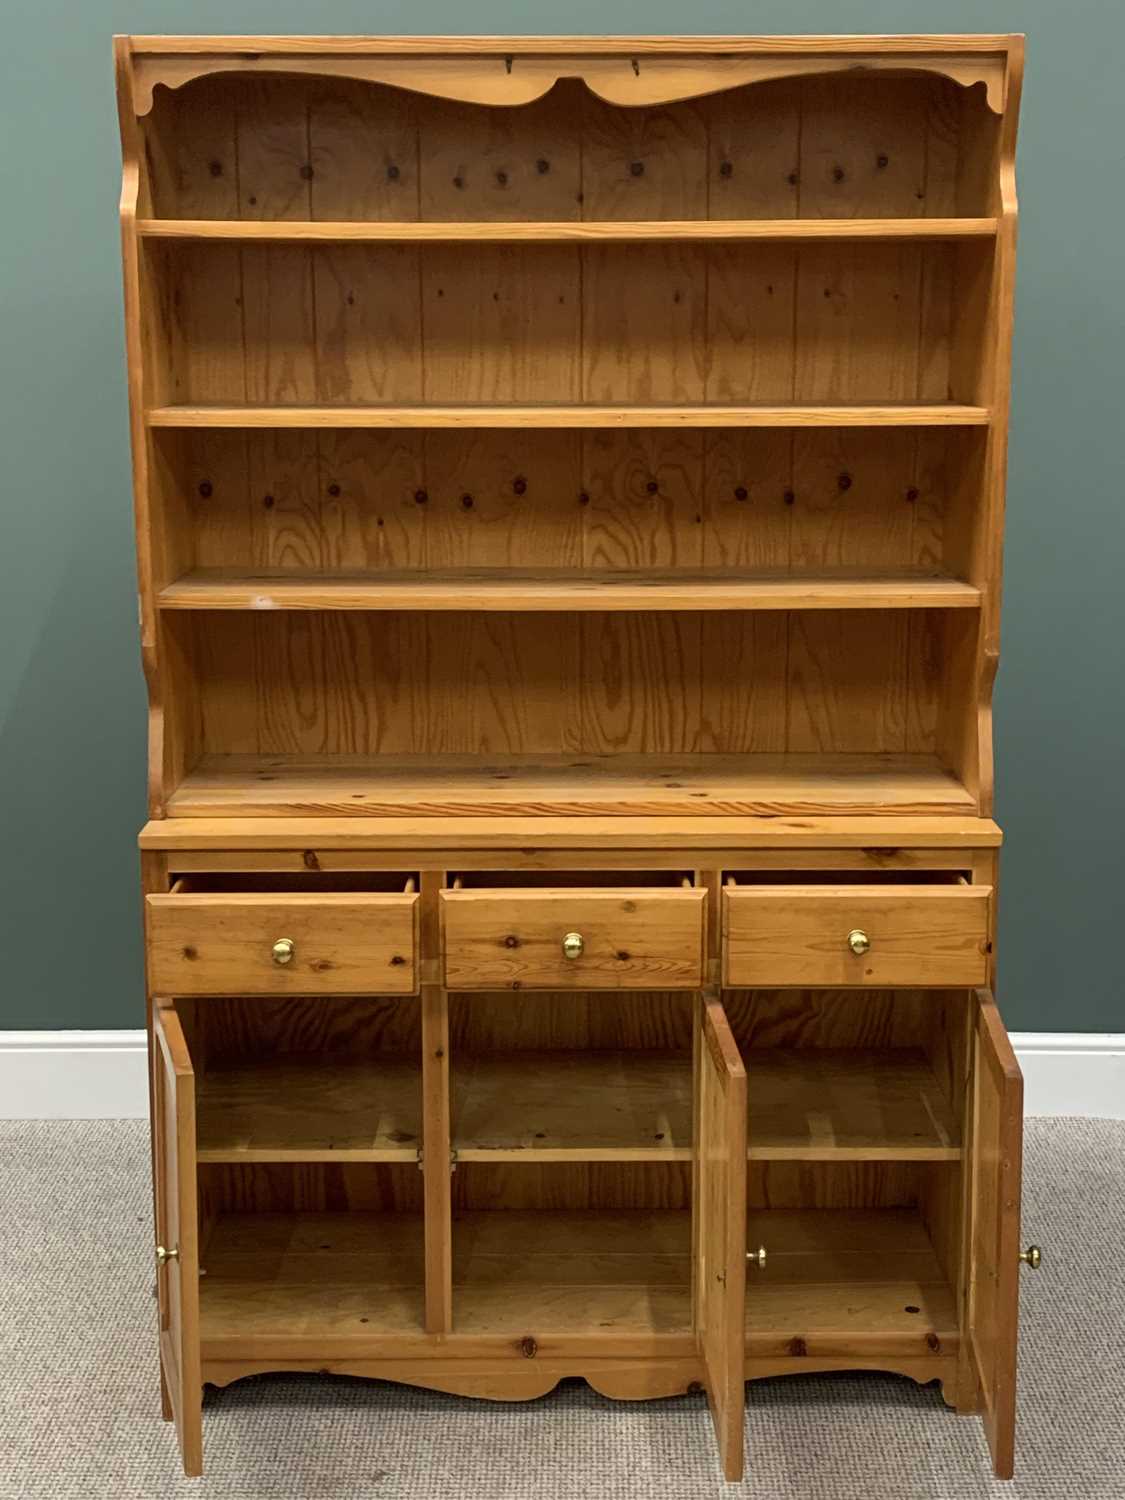 MODERN PINE DRESSER - 183cms H, 113cms W, 43cms D and TWO MULTI-SHELVED ROOM DIVIDERS - 156cms H, - Image 2 of 5